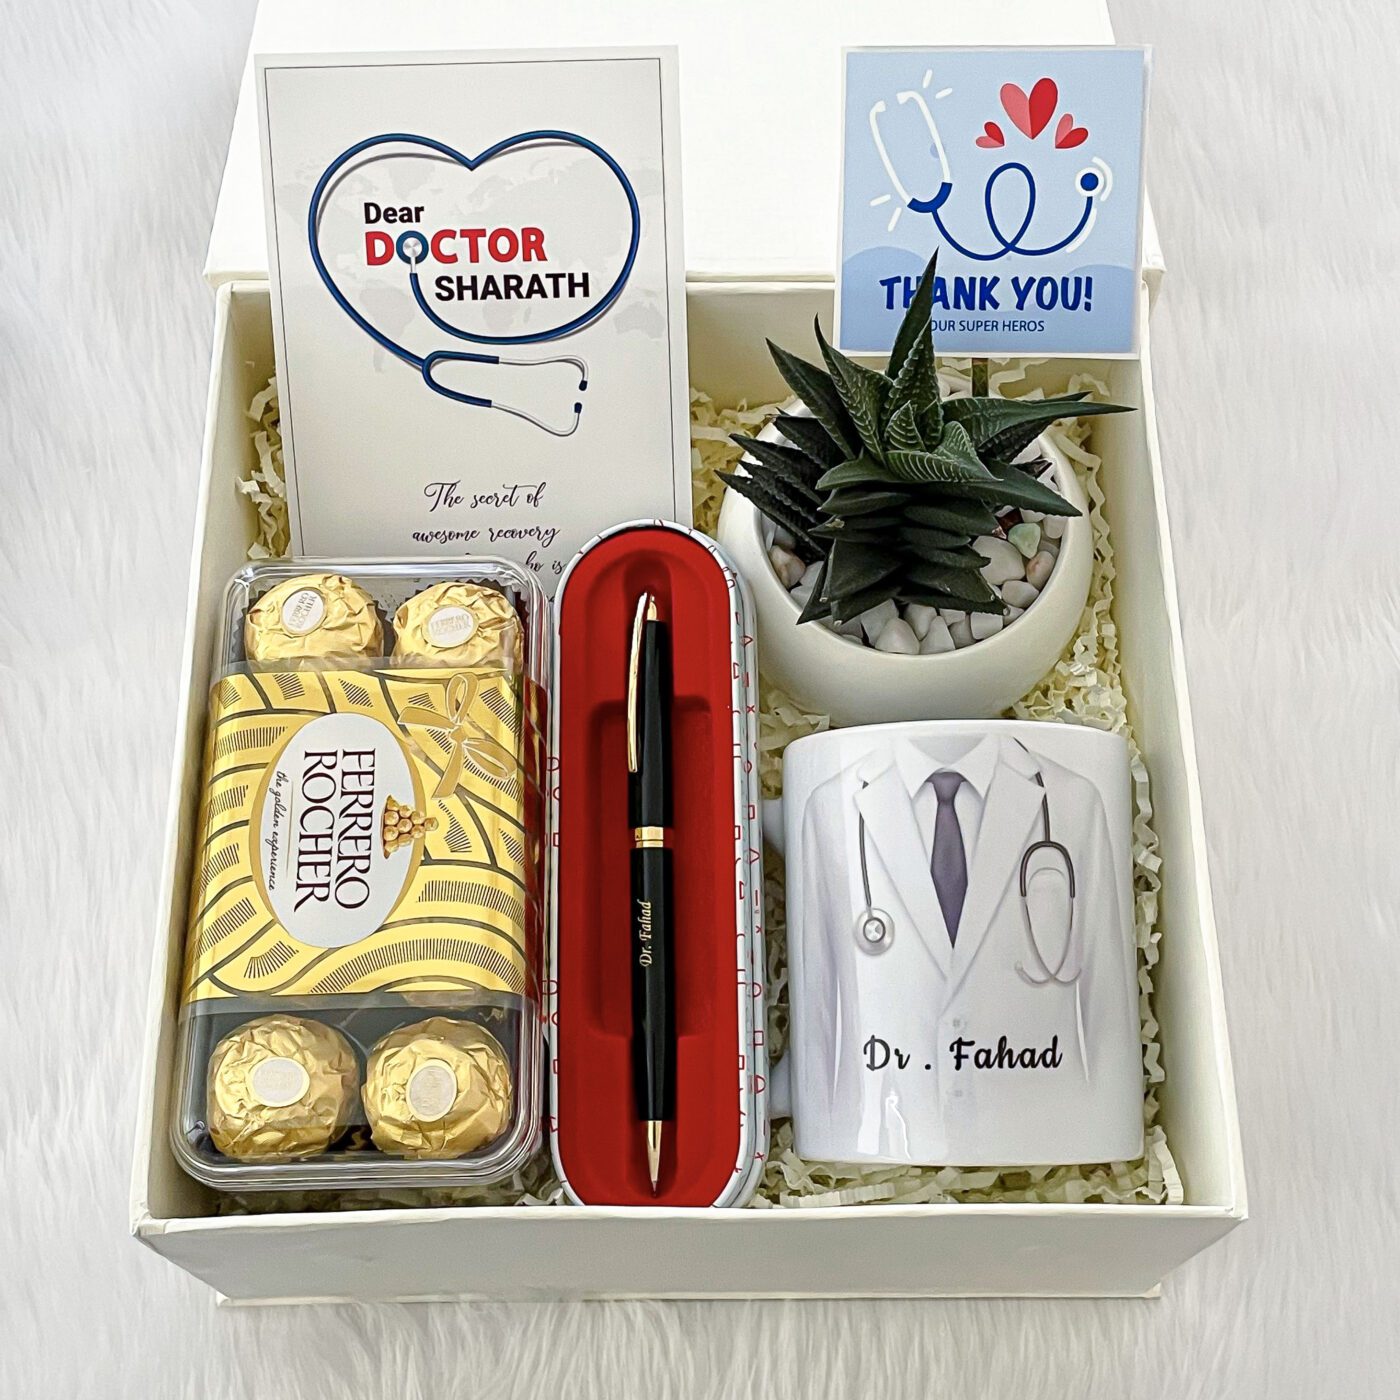 20 Best Gift Ideas For Doctors - Unusual Gifts | Doctor gifts, Best gifts,  Unusual gifts